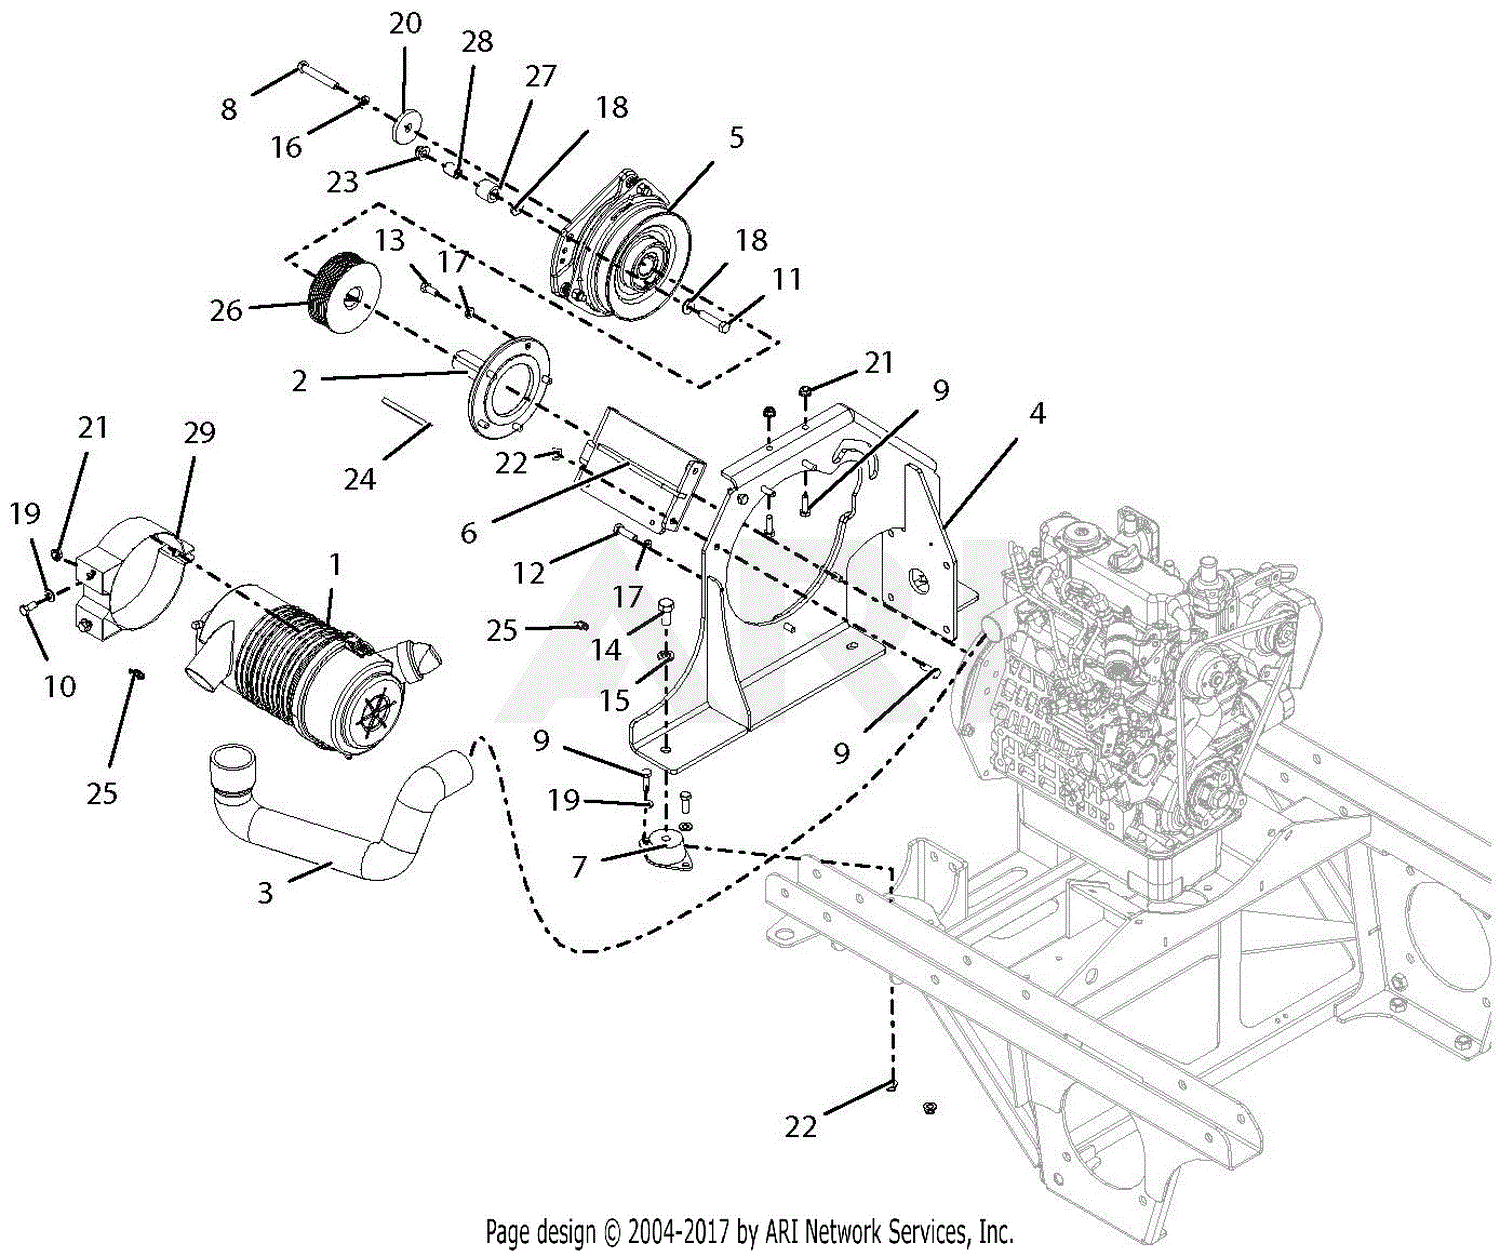 Wiring Diagram For Farmall 460 - Complete Wiring Schemas